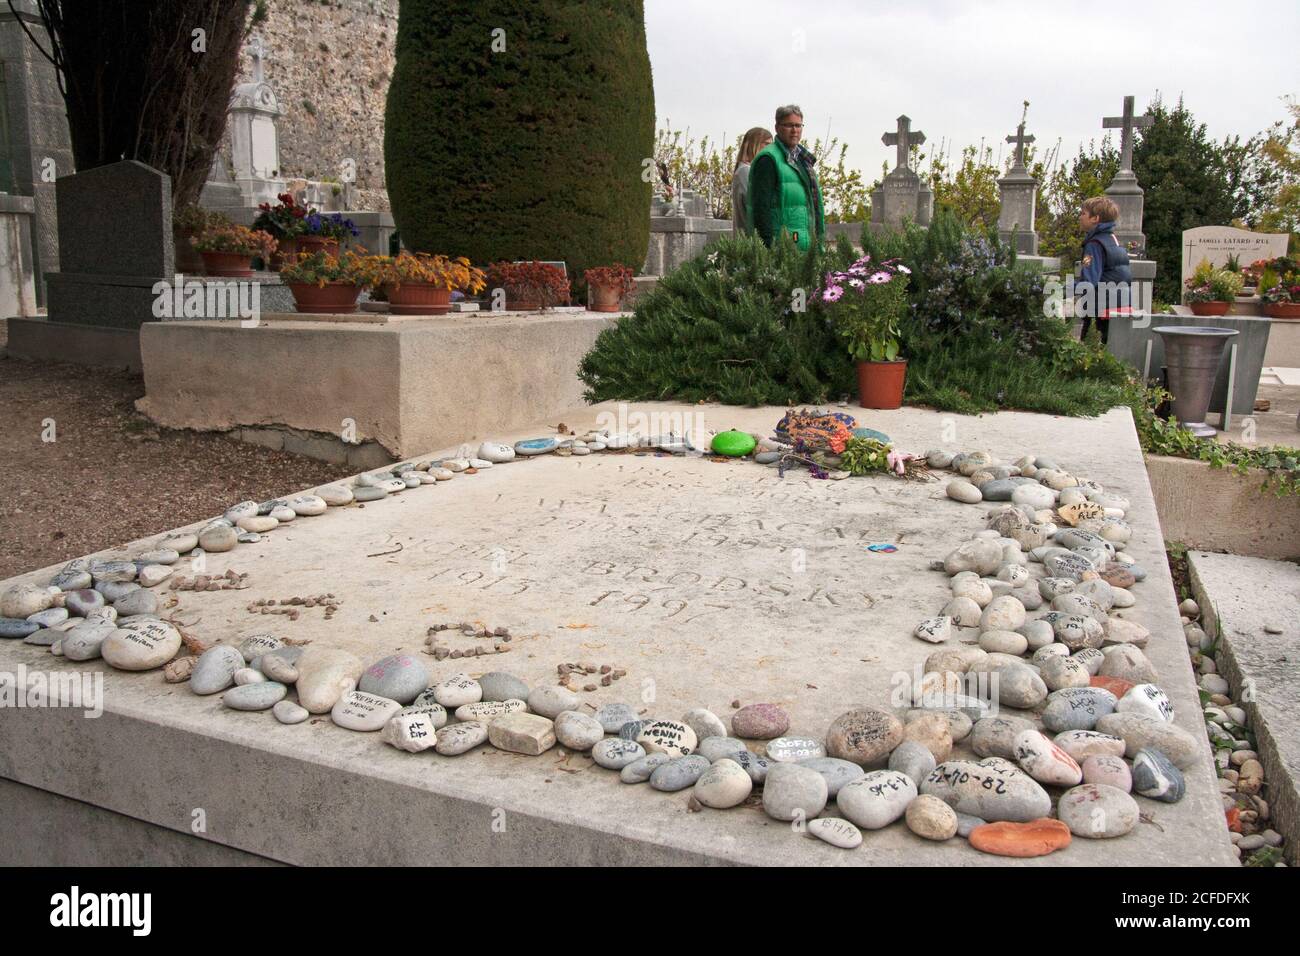 Saint-Paul-de-Vence France Written pebbles on Marc Chagall's tomb. Initials of our name is written in pebbles, to remember this visit. Stock Photo